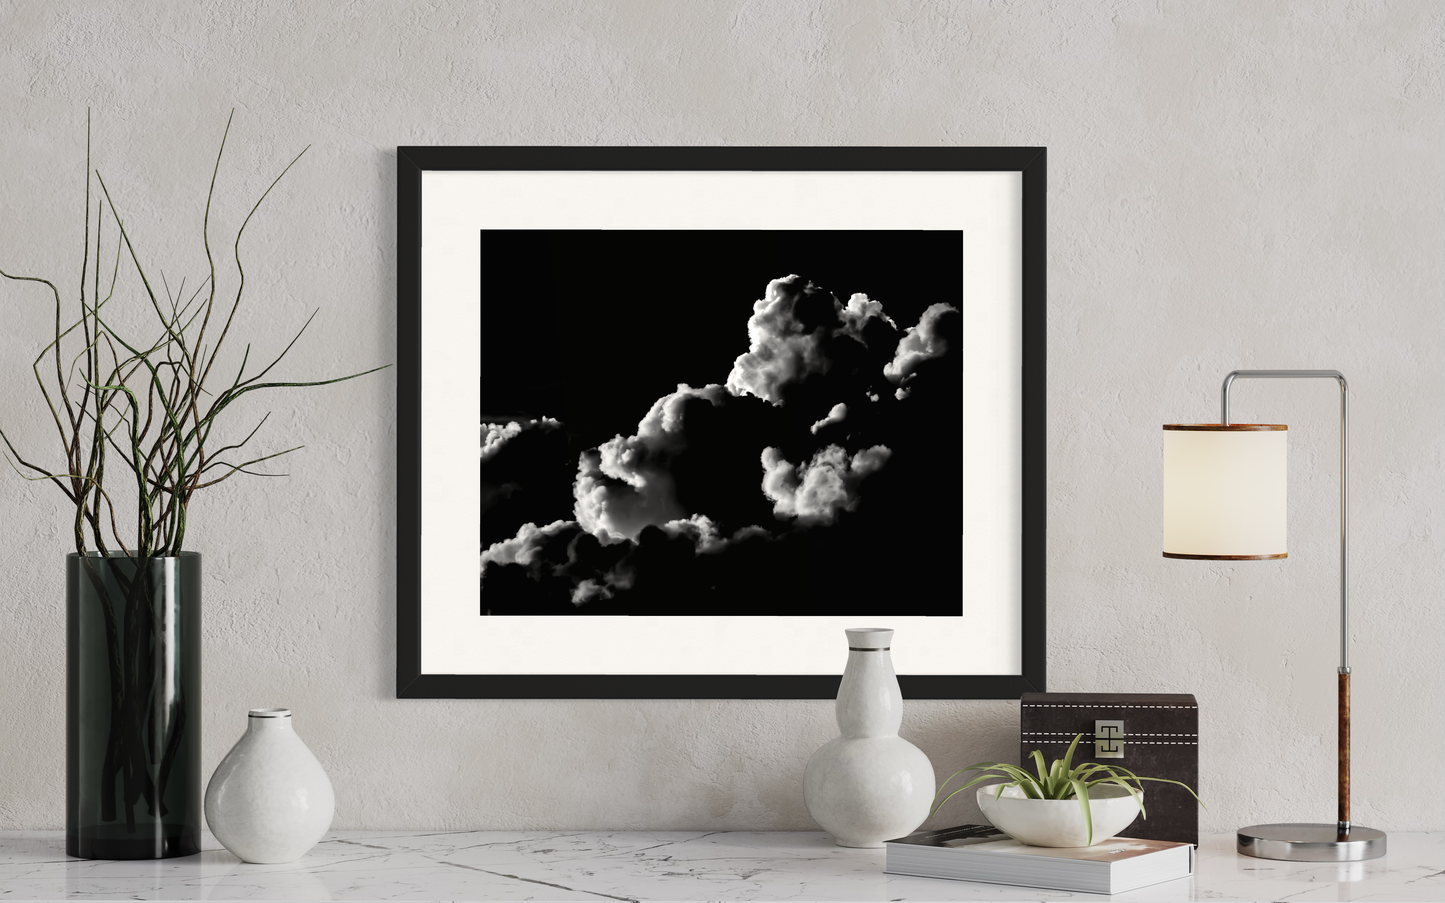 black and white photo of clouds, one looks like a dog's head in profile in black frame on white wall above modern table